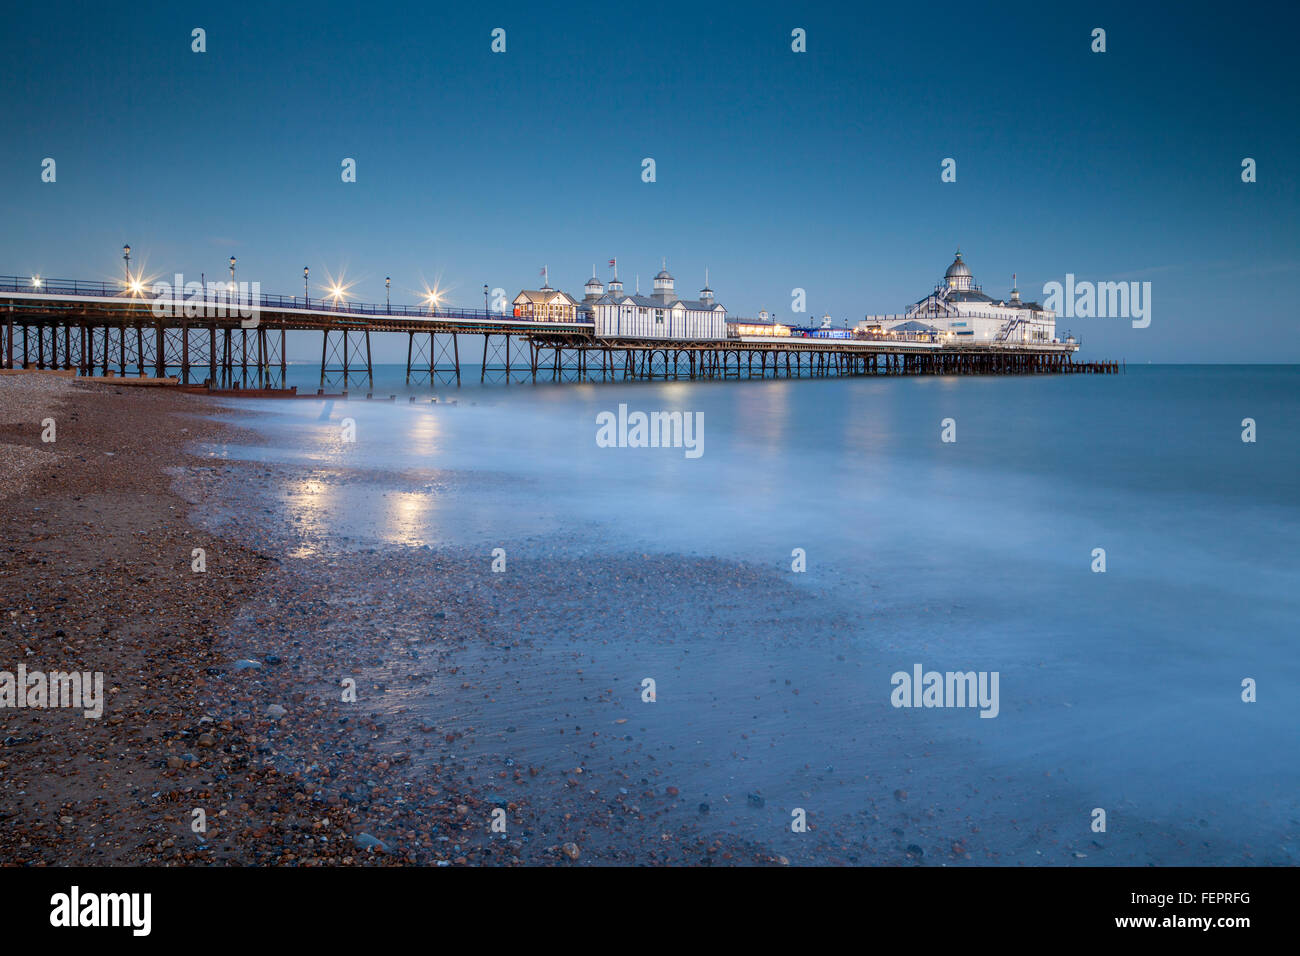 Winter evening at Eastbourne Pier, East Sussex, England. Stock Photo